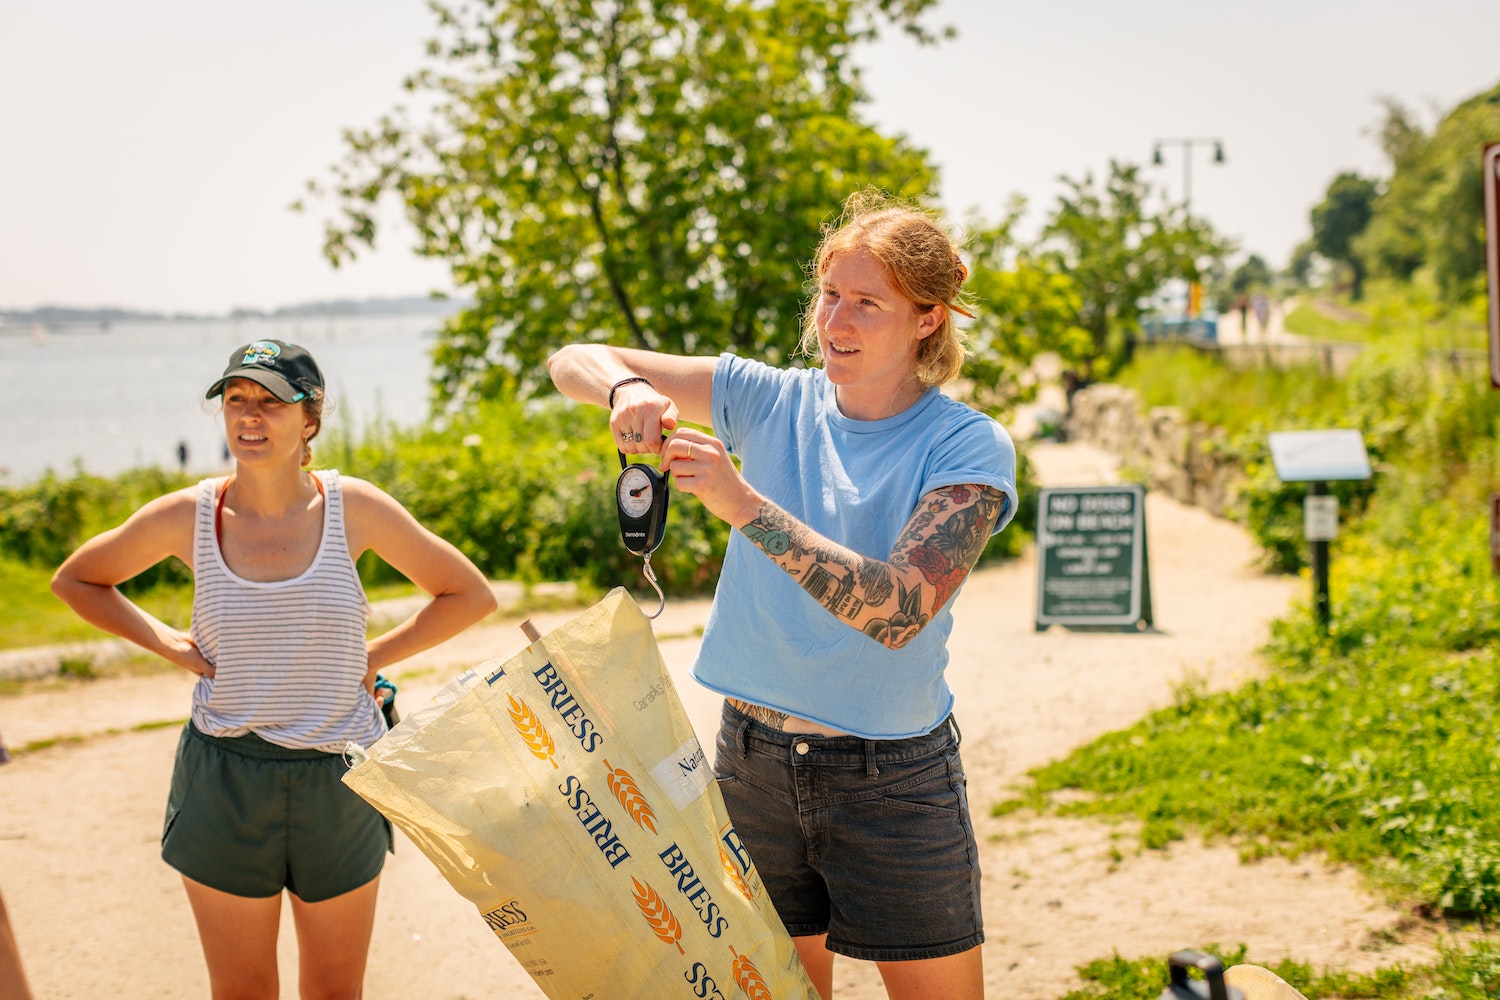 weighing trash that the Allagash team picked up during a cleanup of East End Beach